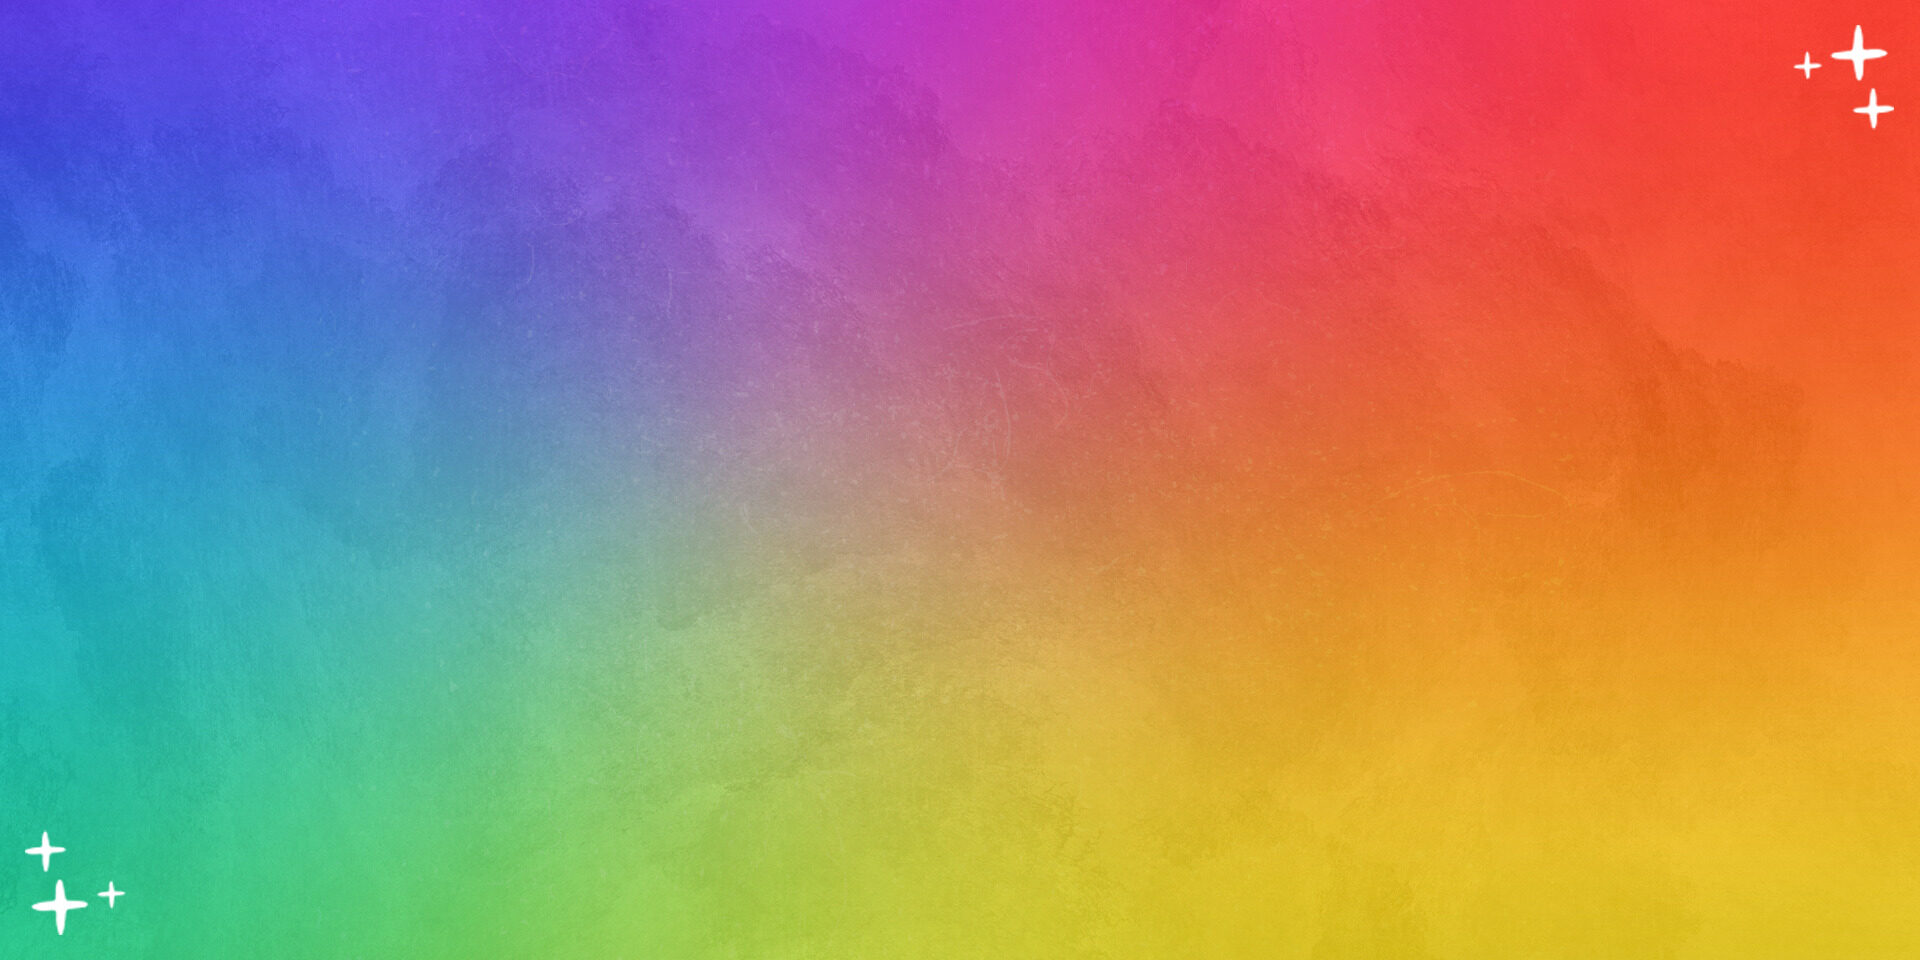 A background image of rainbow colors